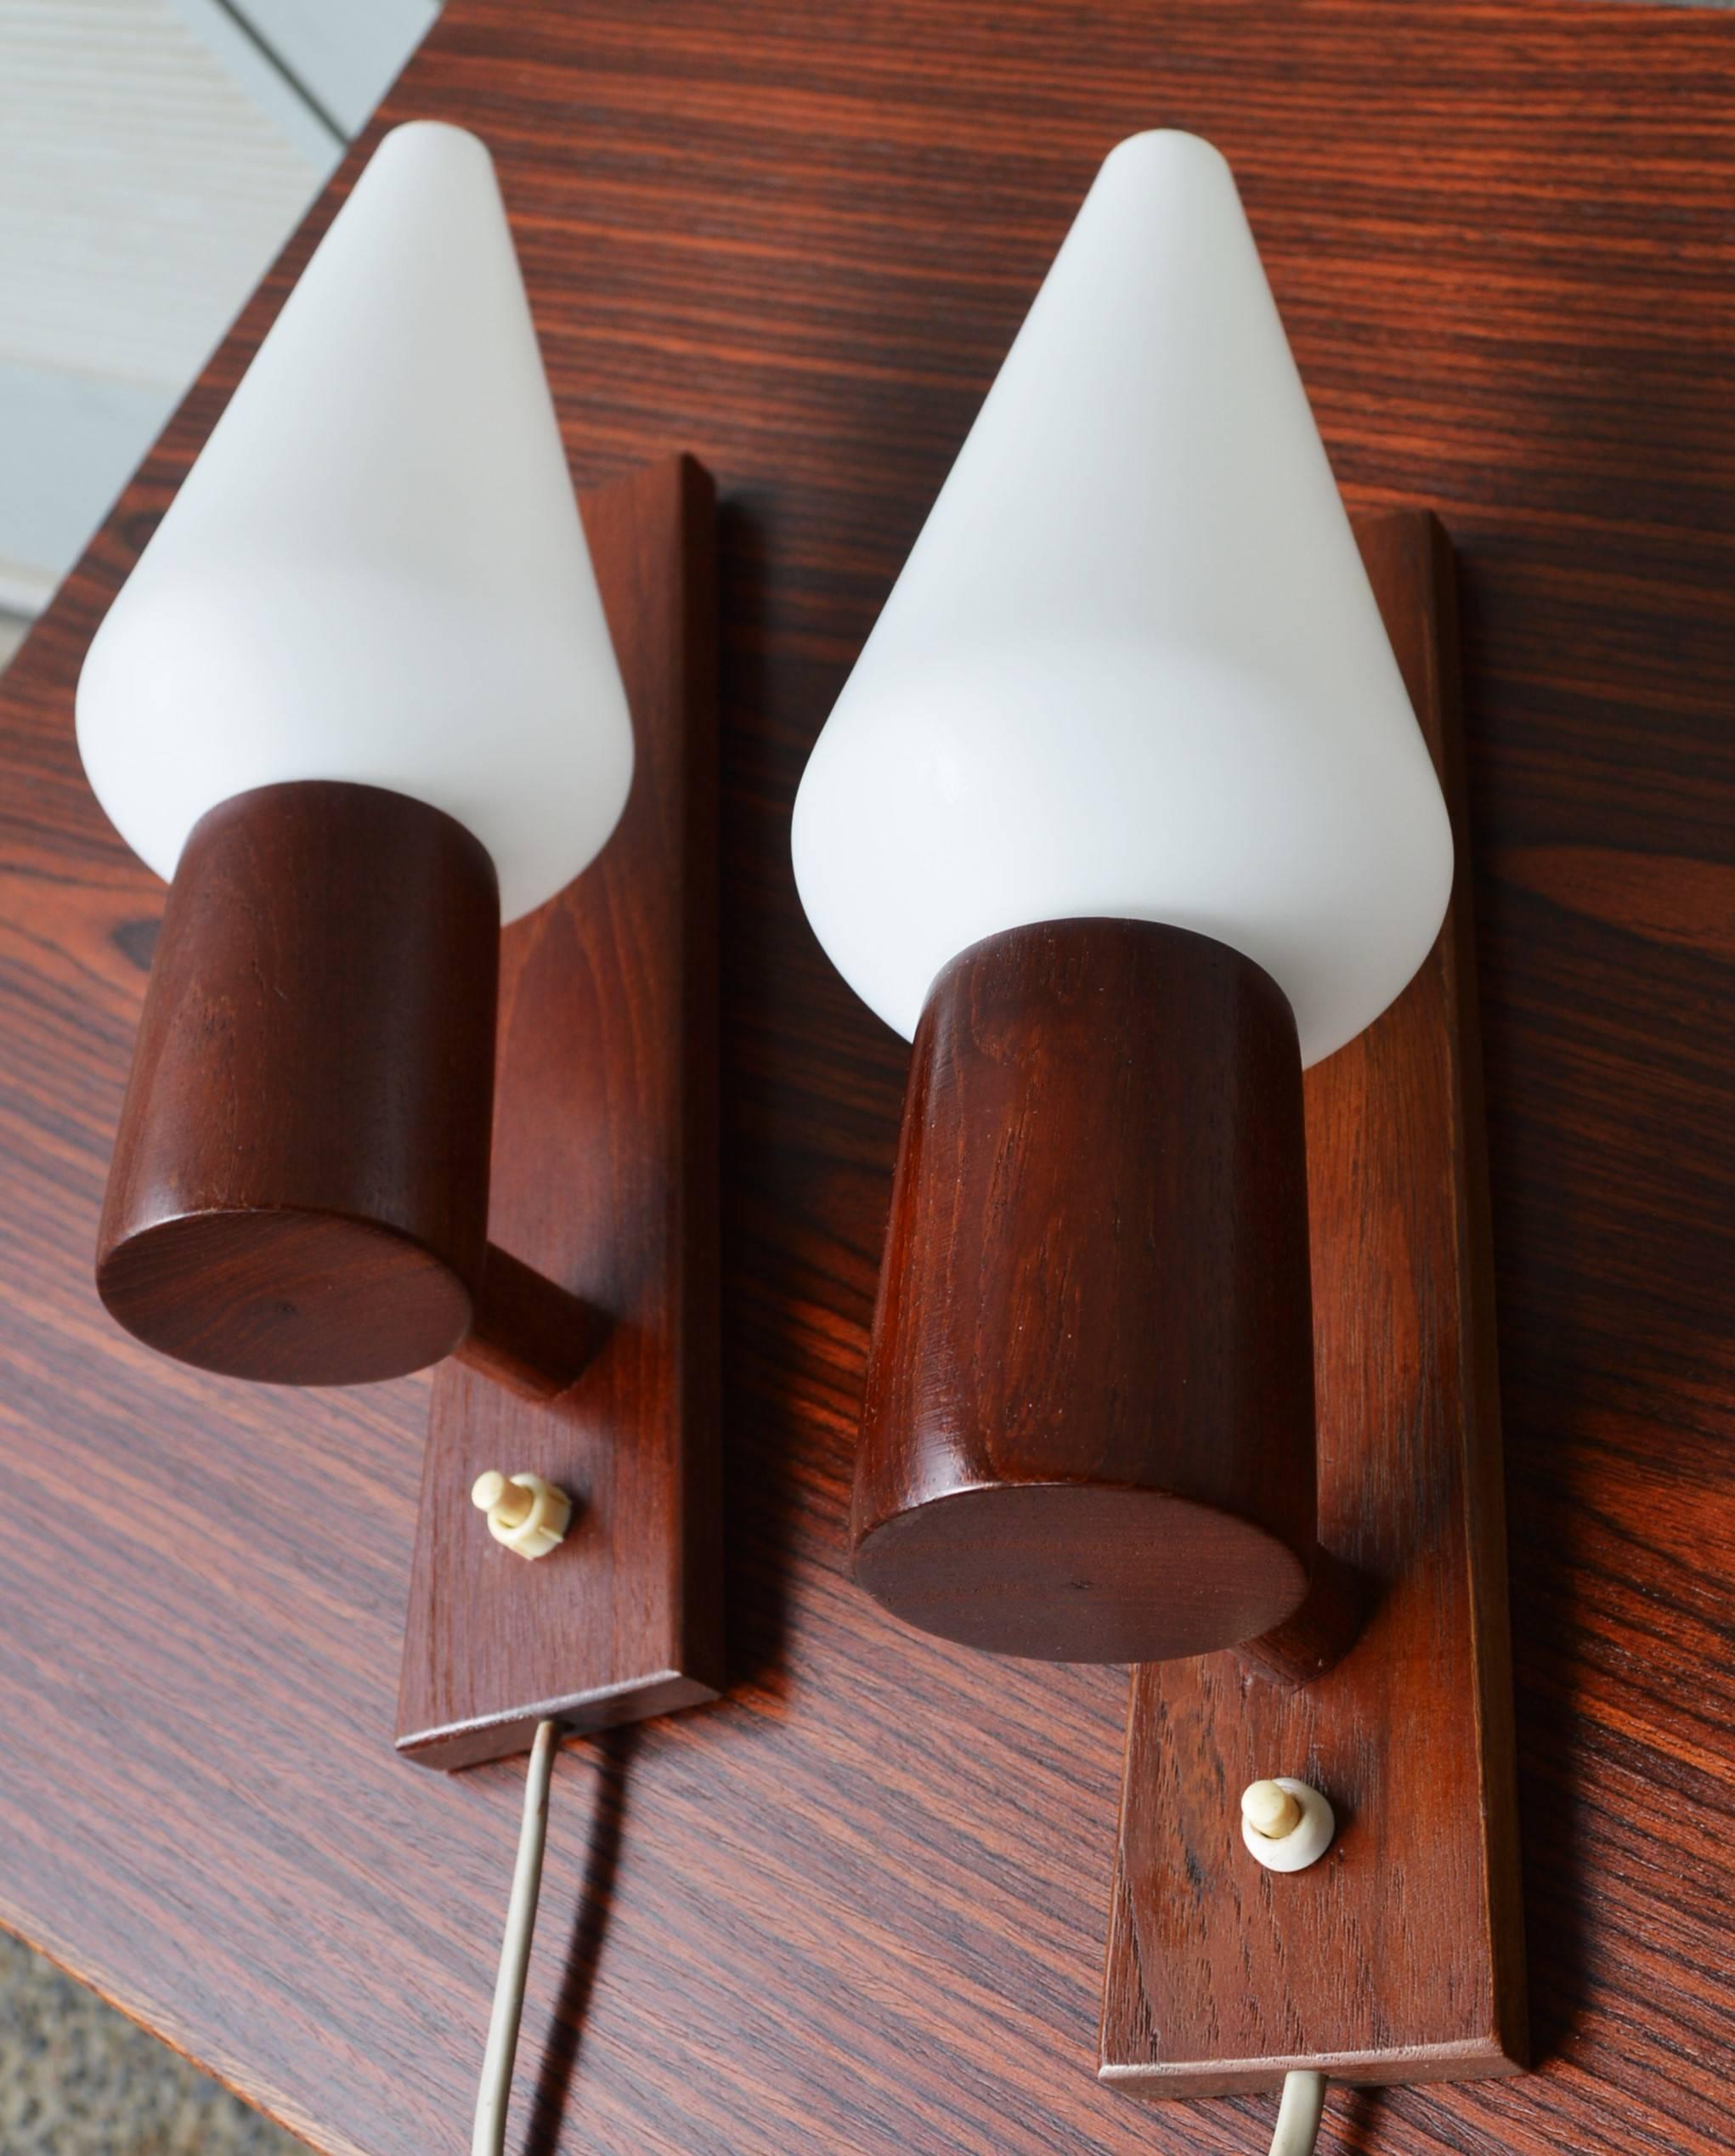 This stellar pair of rare Danish modern teak wall sconces are cleverly designed with the switch on the sconce and a long cord to plug into the wall - freeing you from the need to get them professionally hard wired into the wall by an electrician,